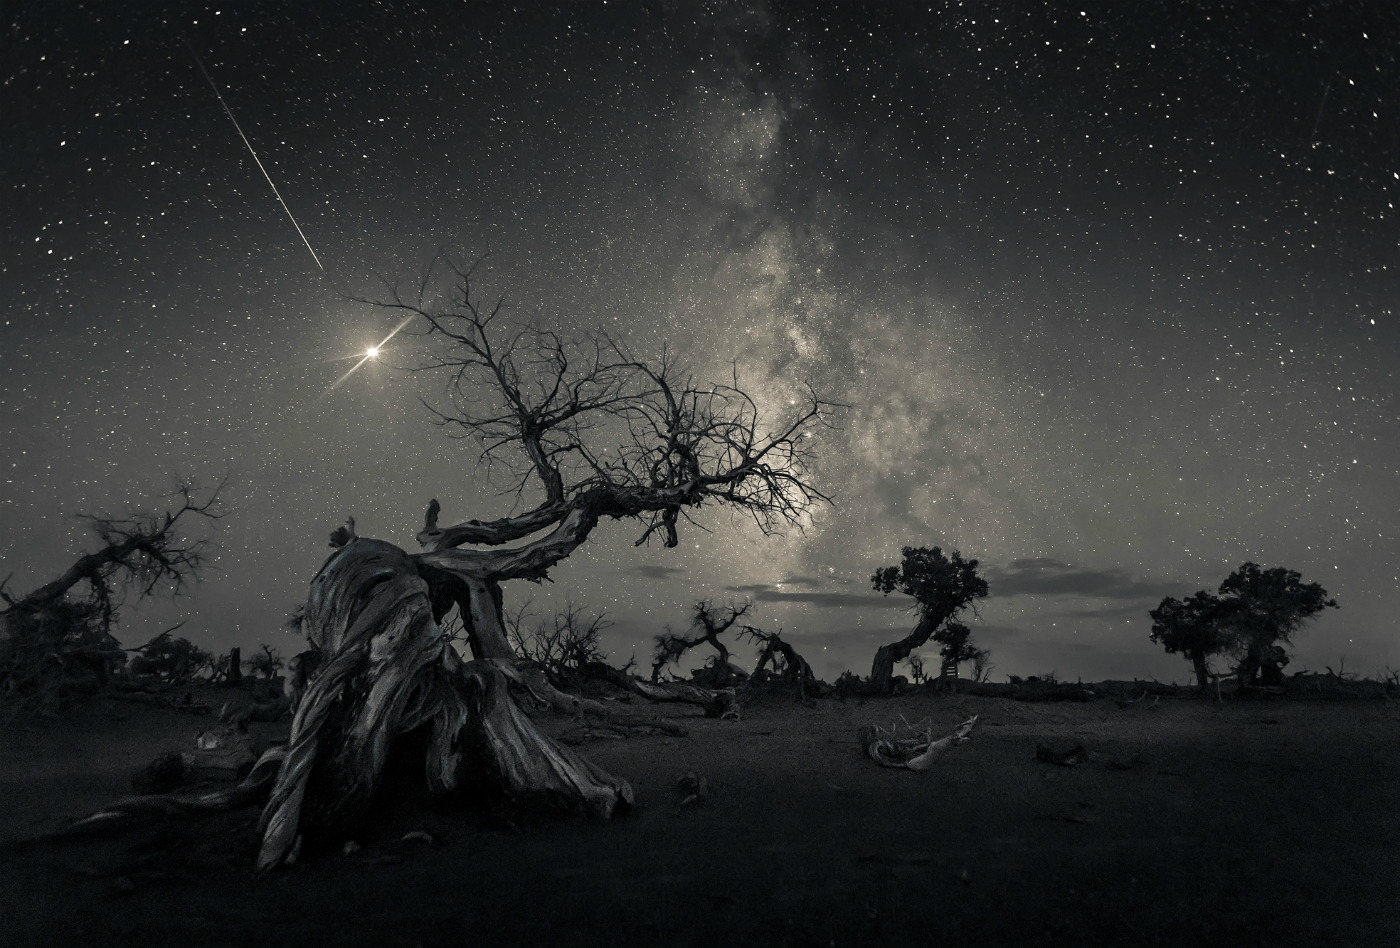 Astronomy Photographer of the Year 2019 winners